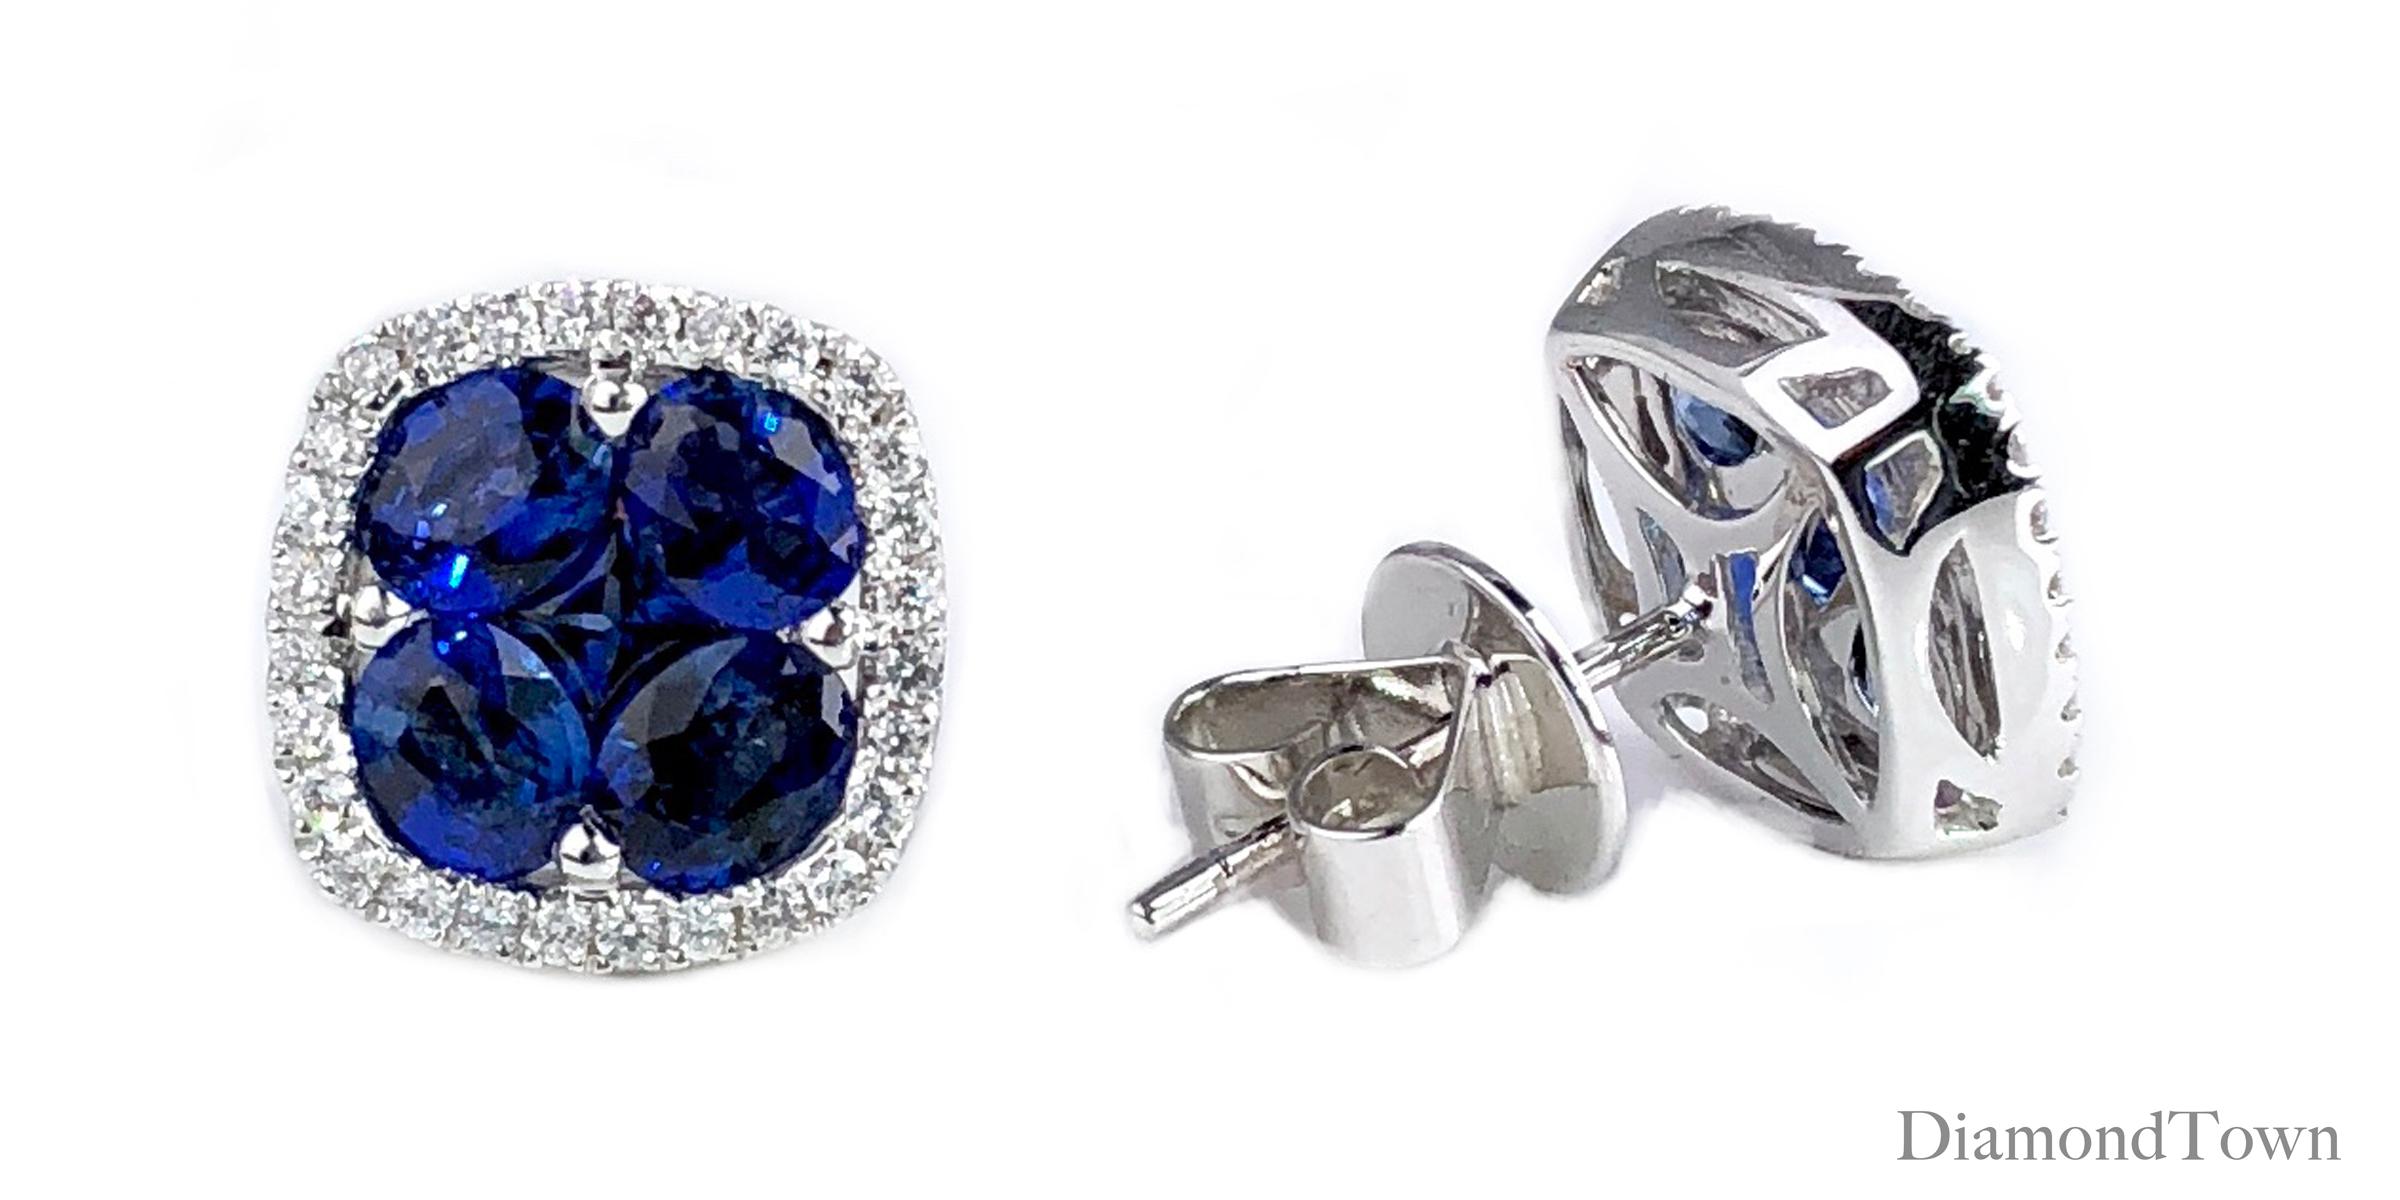 These stud earrings feature a cluster center of blue sapphires (five stones per earring, total weight 2.6 carats) surrounded by a halo of round white diamonds (total diamond weight 0.21 carats), set in 18k white gold.

DiamondTown is pleased to